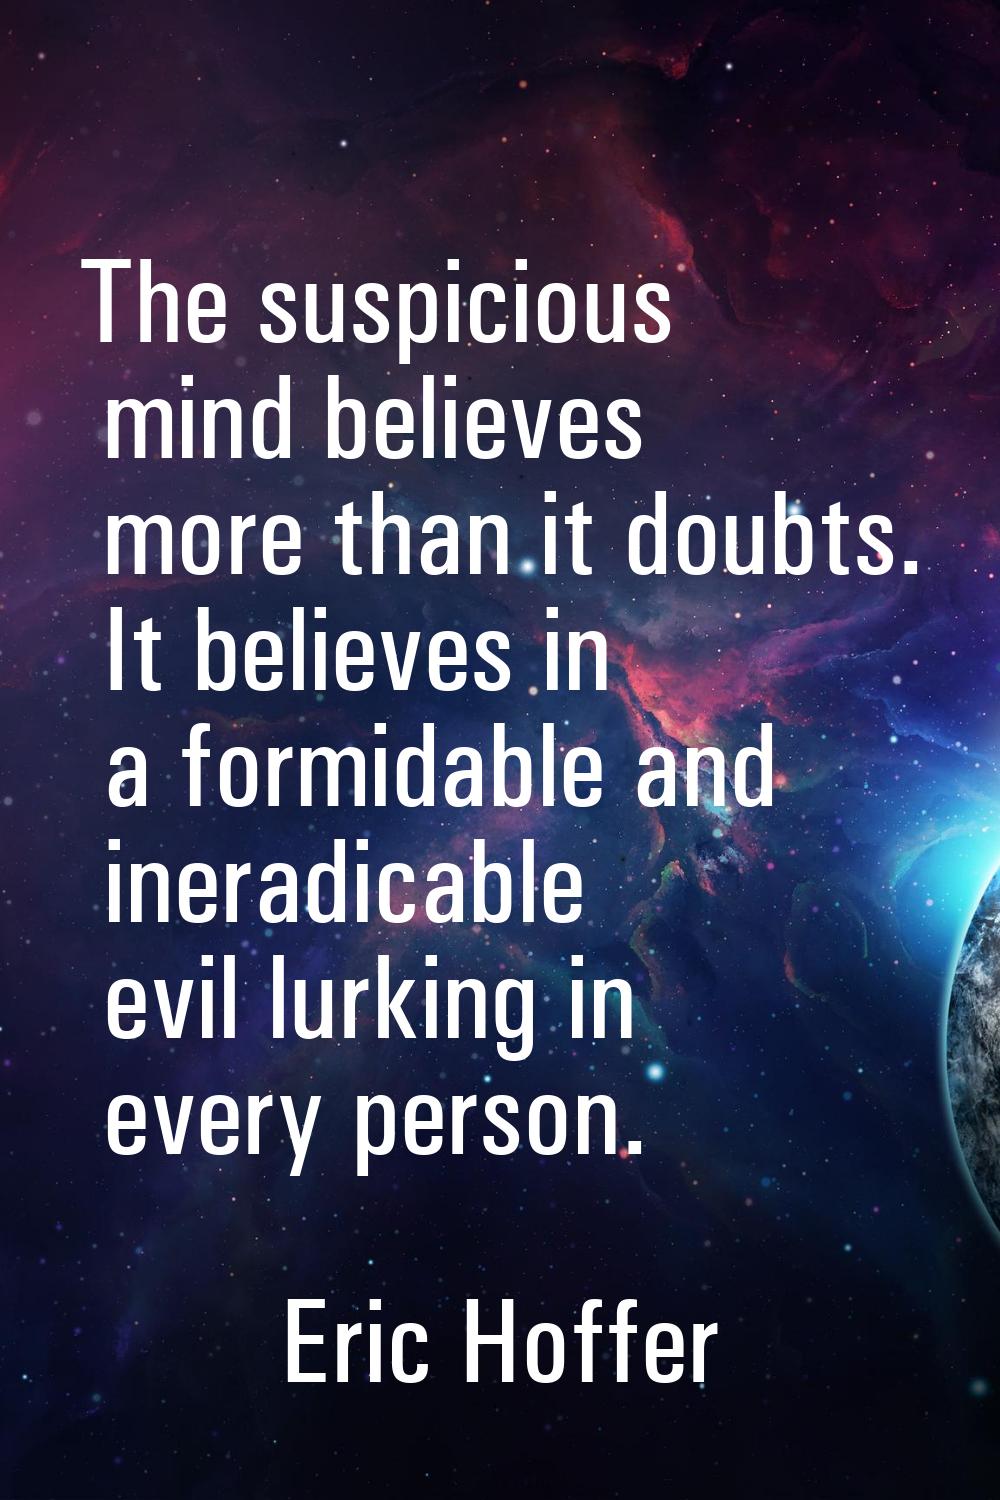 The suspicious mind believes more than it doubts. It believes in a formidable and ineradicable evil